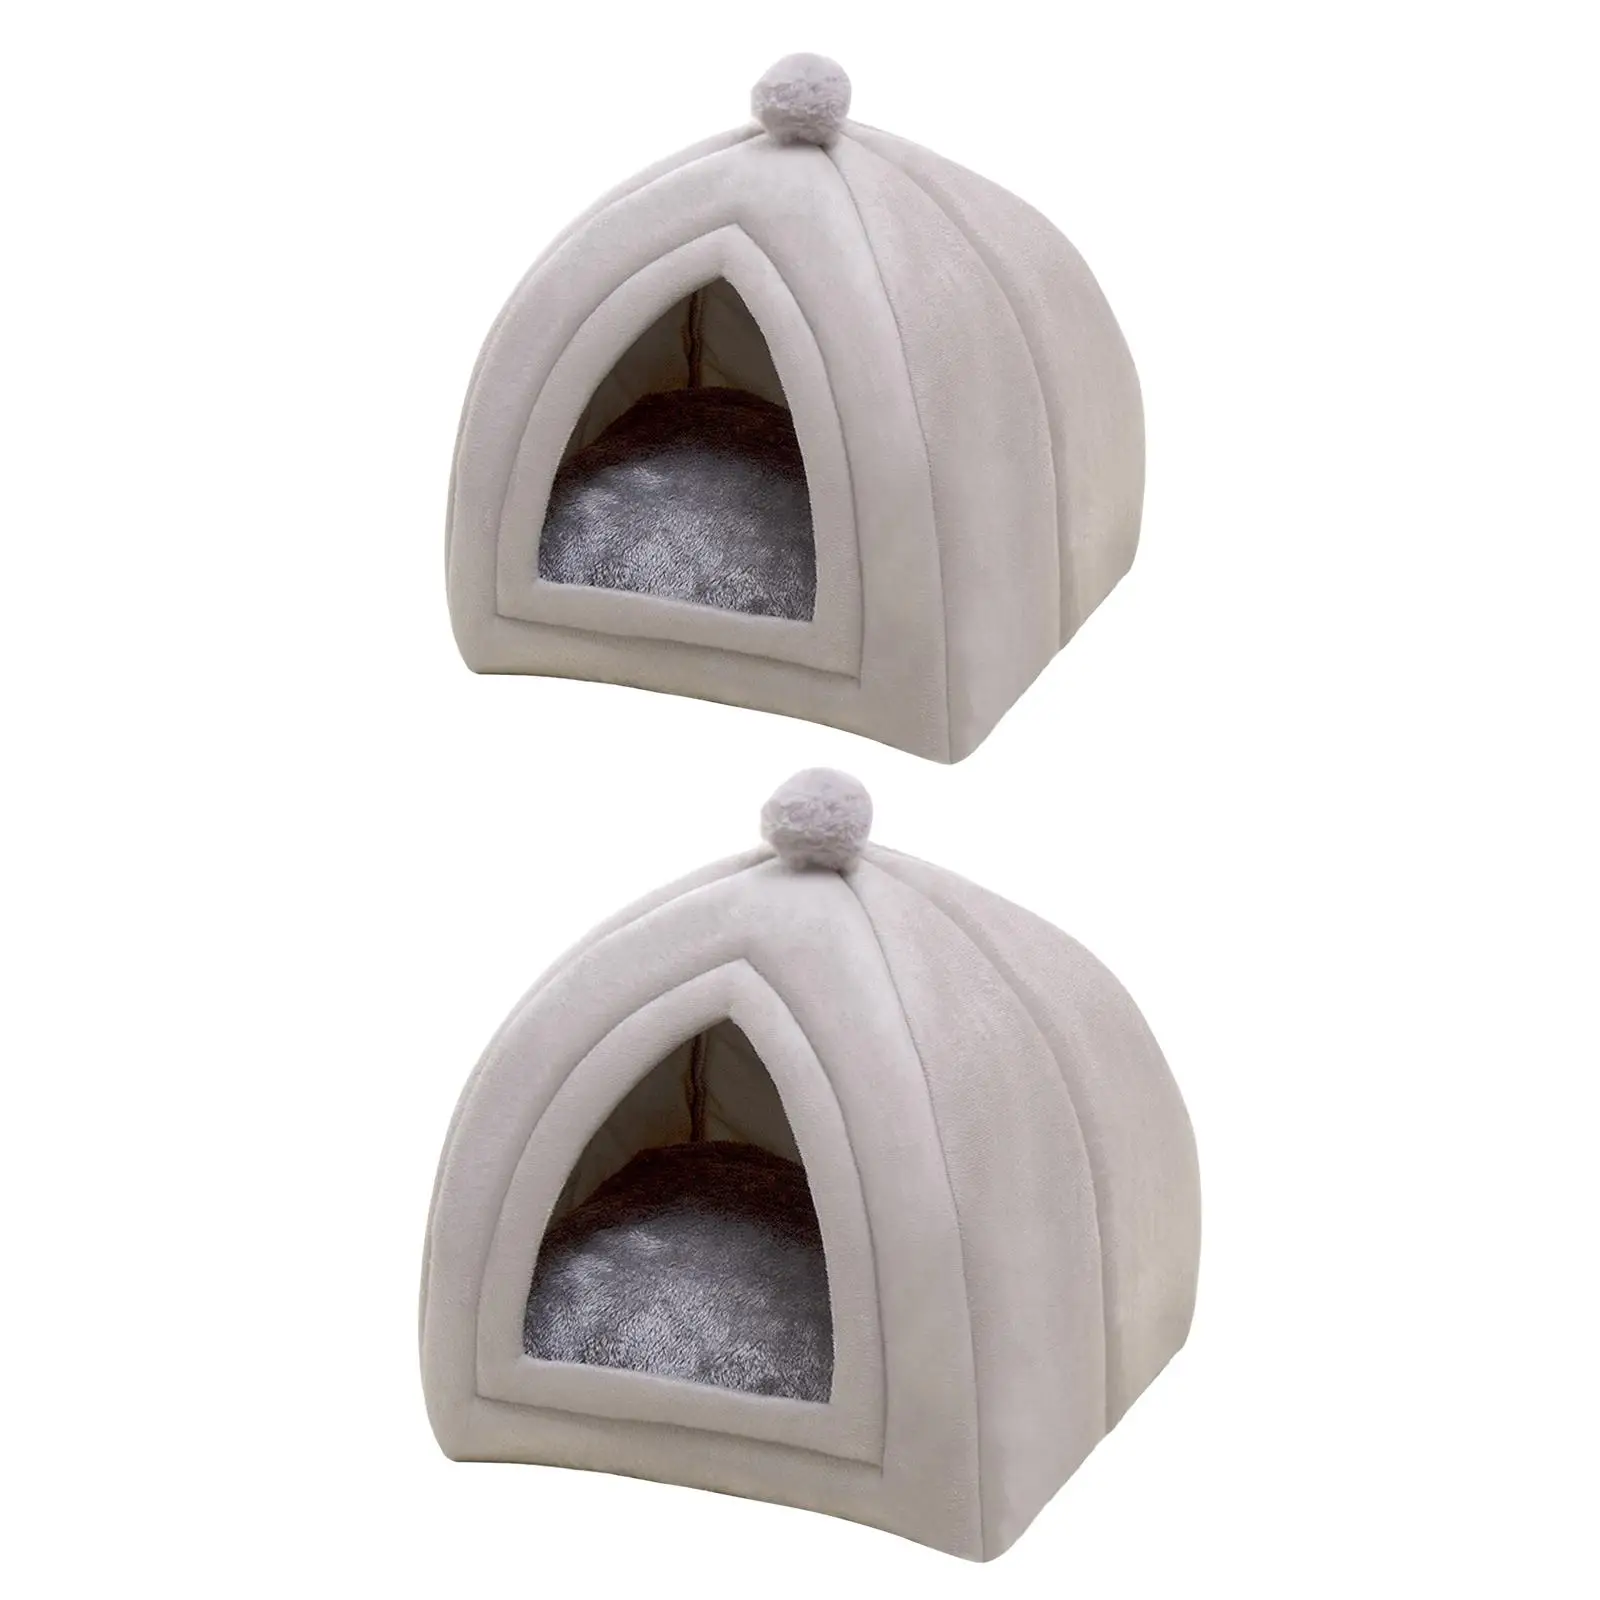 Portable Cat house Nest Cushion Kennel Washable for Puppy Winter Floor